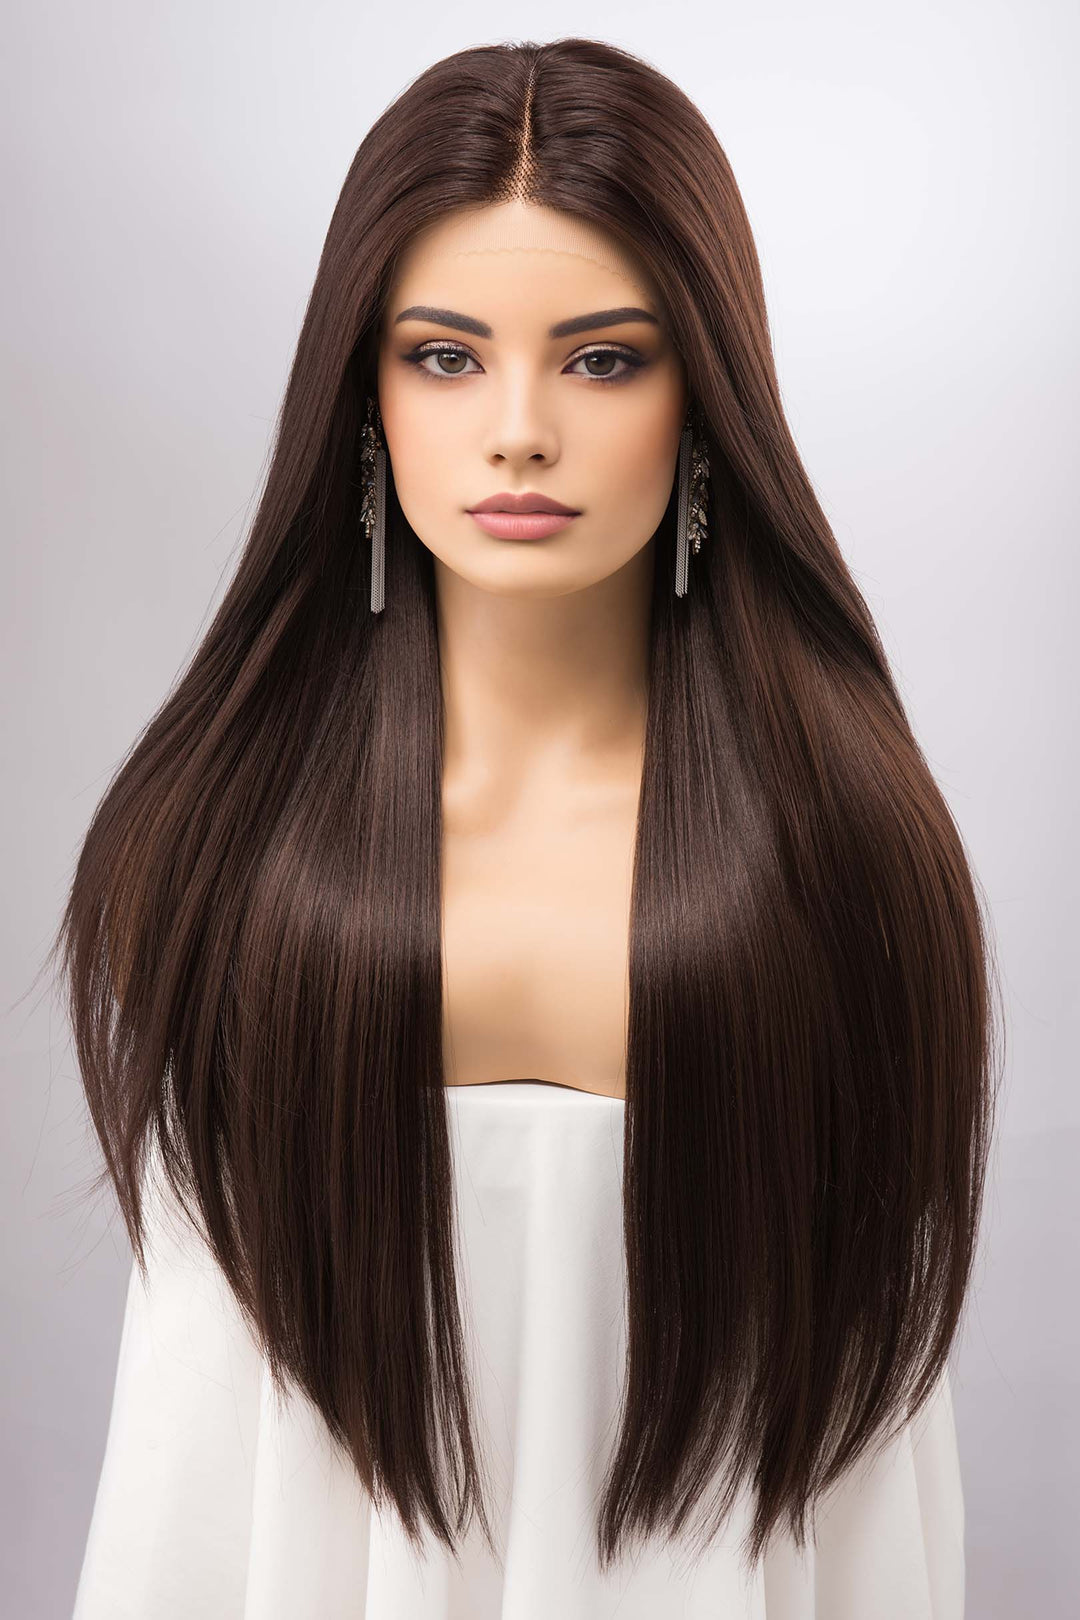 Dark Brown Wig Lace Front Wig Natural Straight Layered Cut Brown Wigs for Women Cosplay Wig Drag Queen Wig Chemo Wig Marley